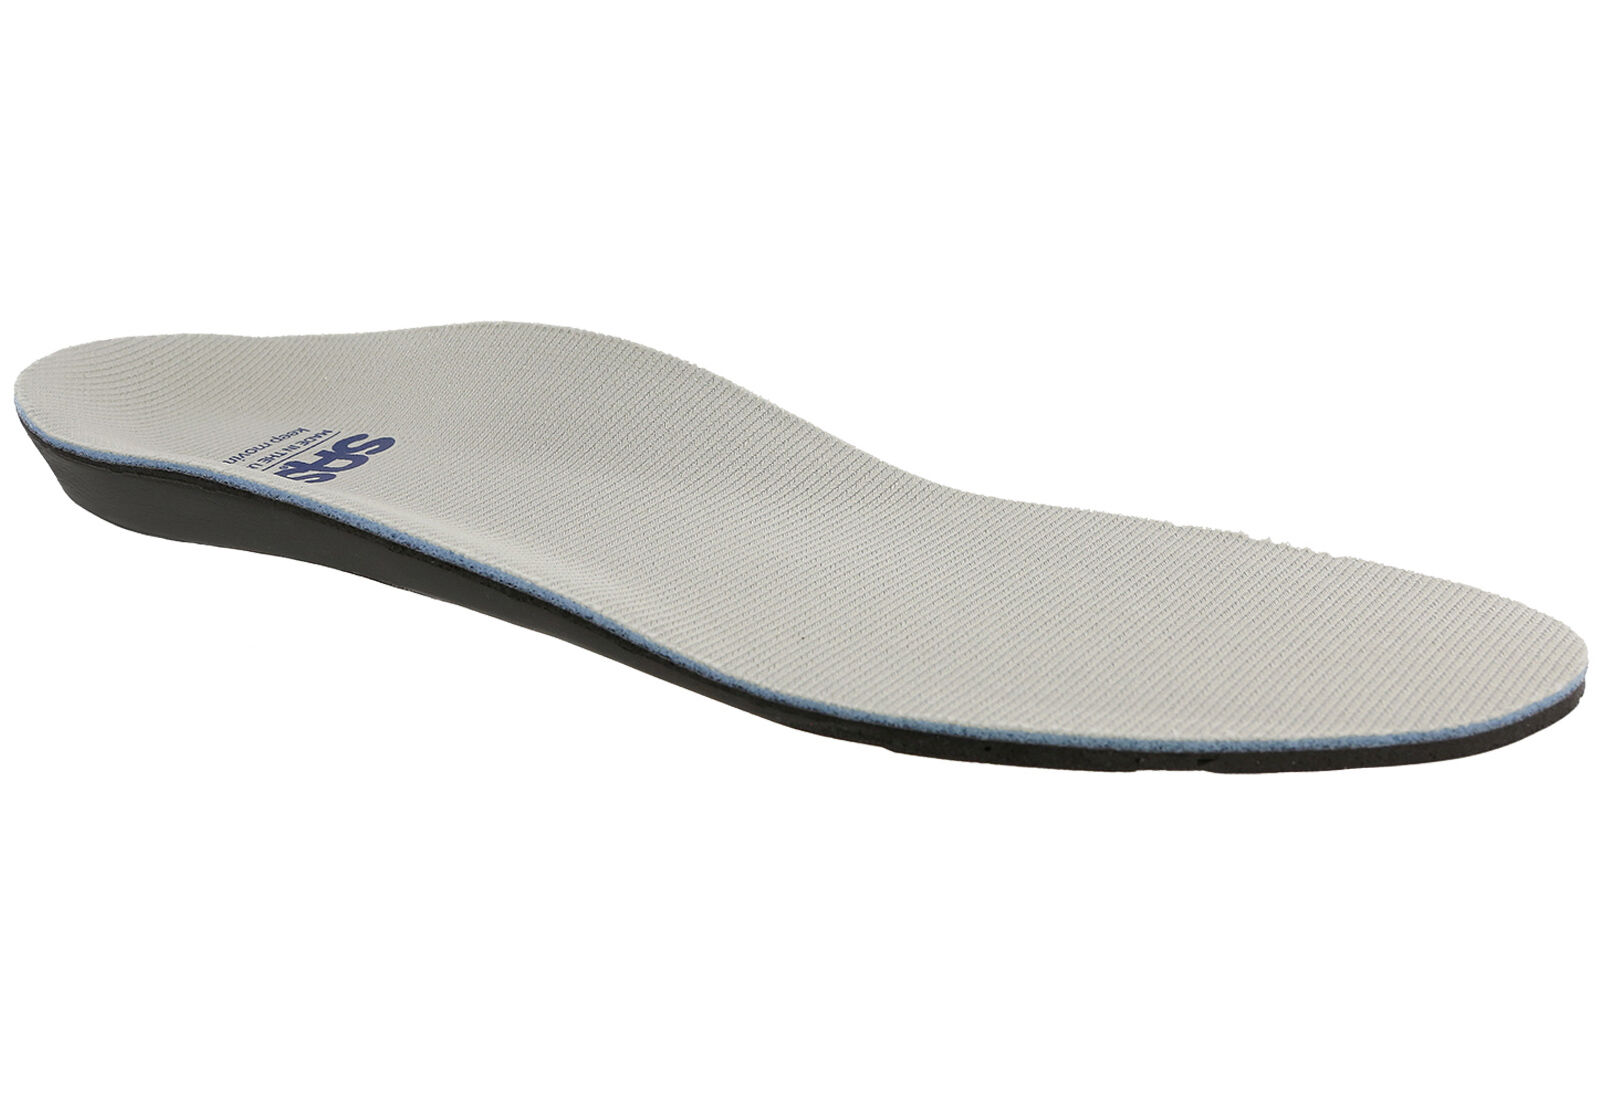 Arch Plus Neutral Gray Footbed | SAS Shoes